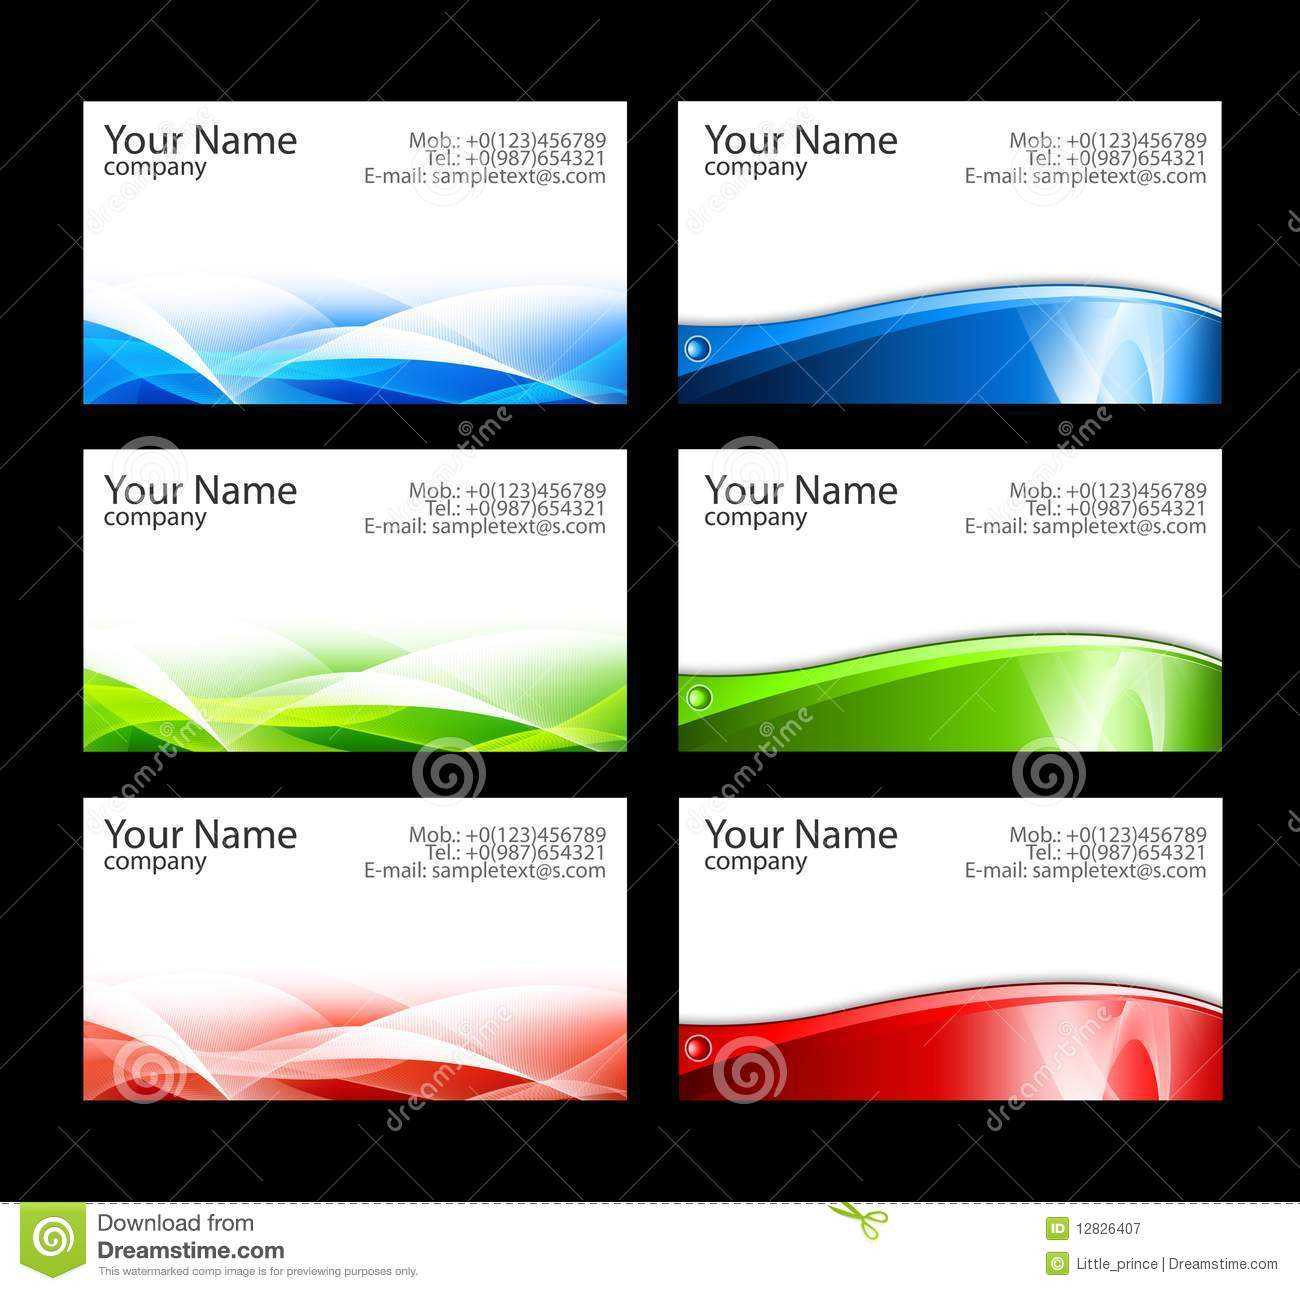 Business Cards Templates Stock Illustration. Illustration Of Regarding Call Card Templates